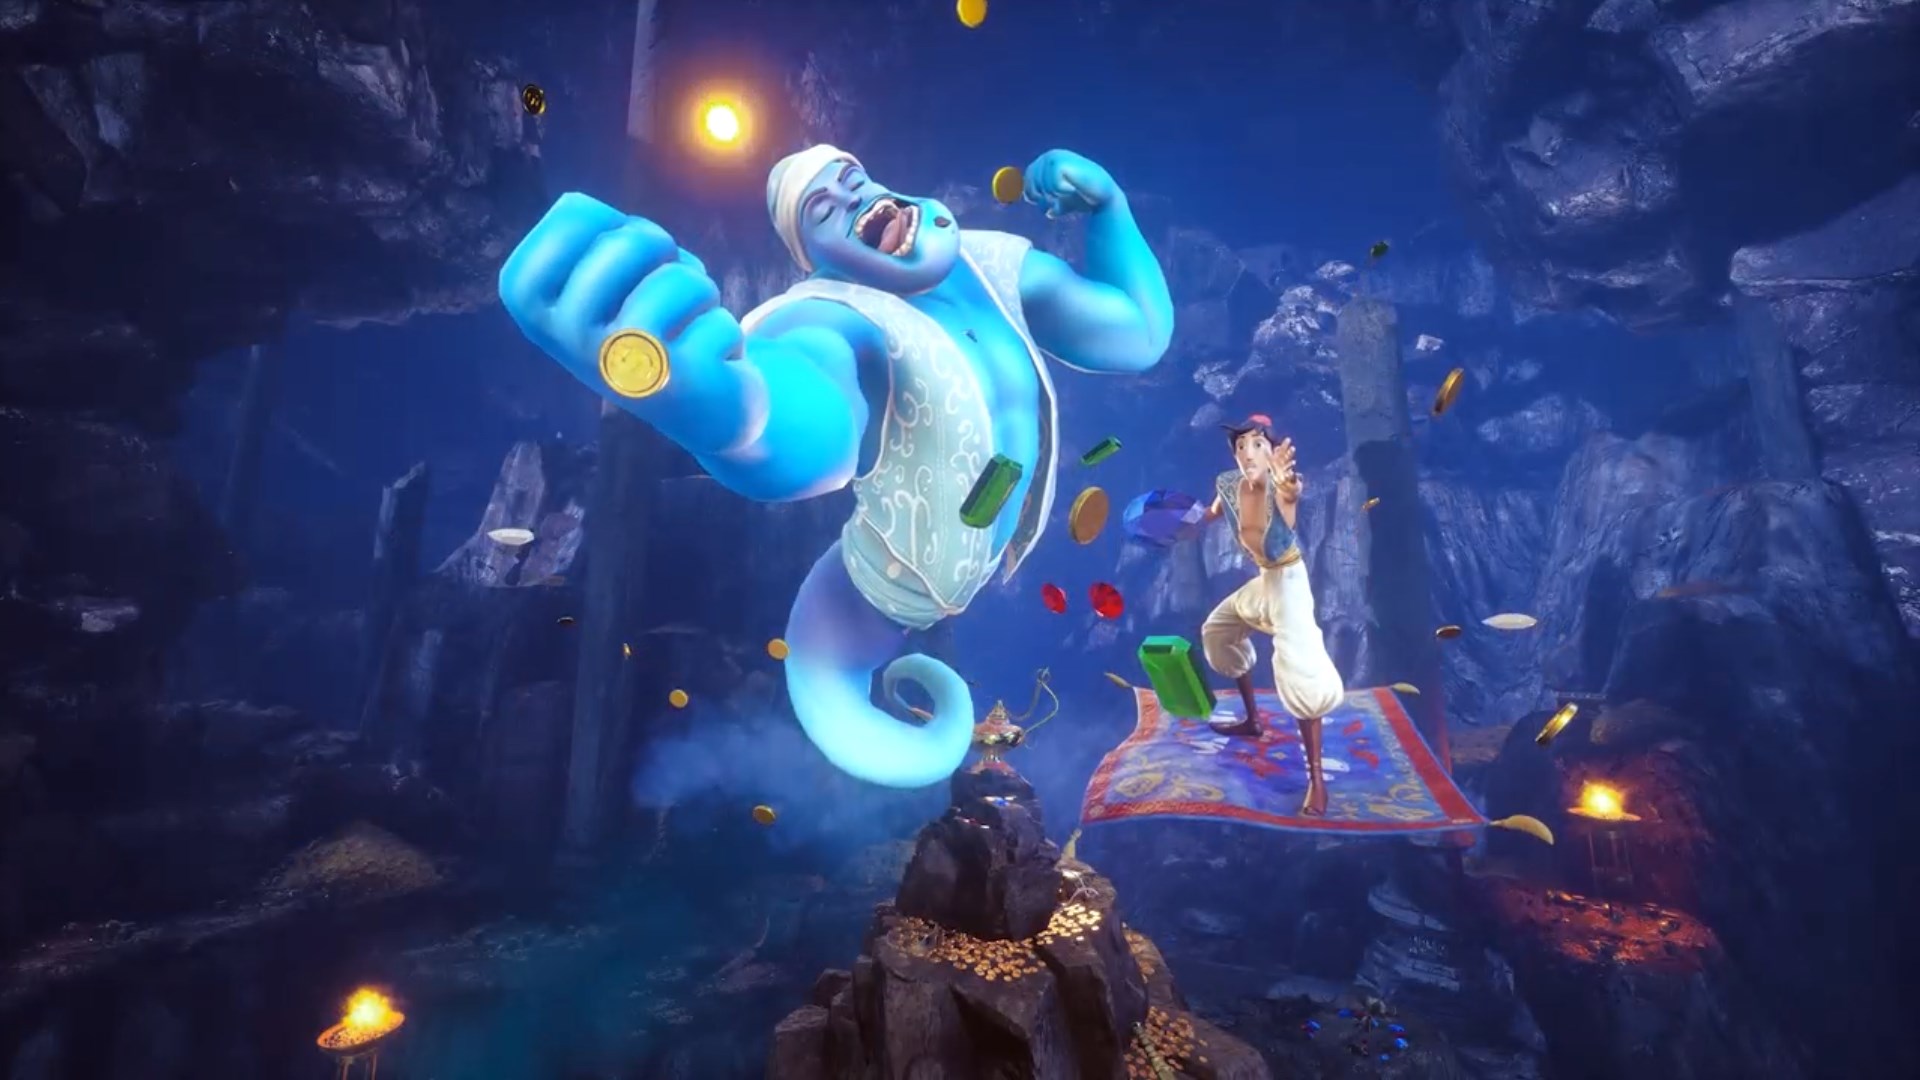 Disney Joint Hot VR Game Aladdin released - News - 3